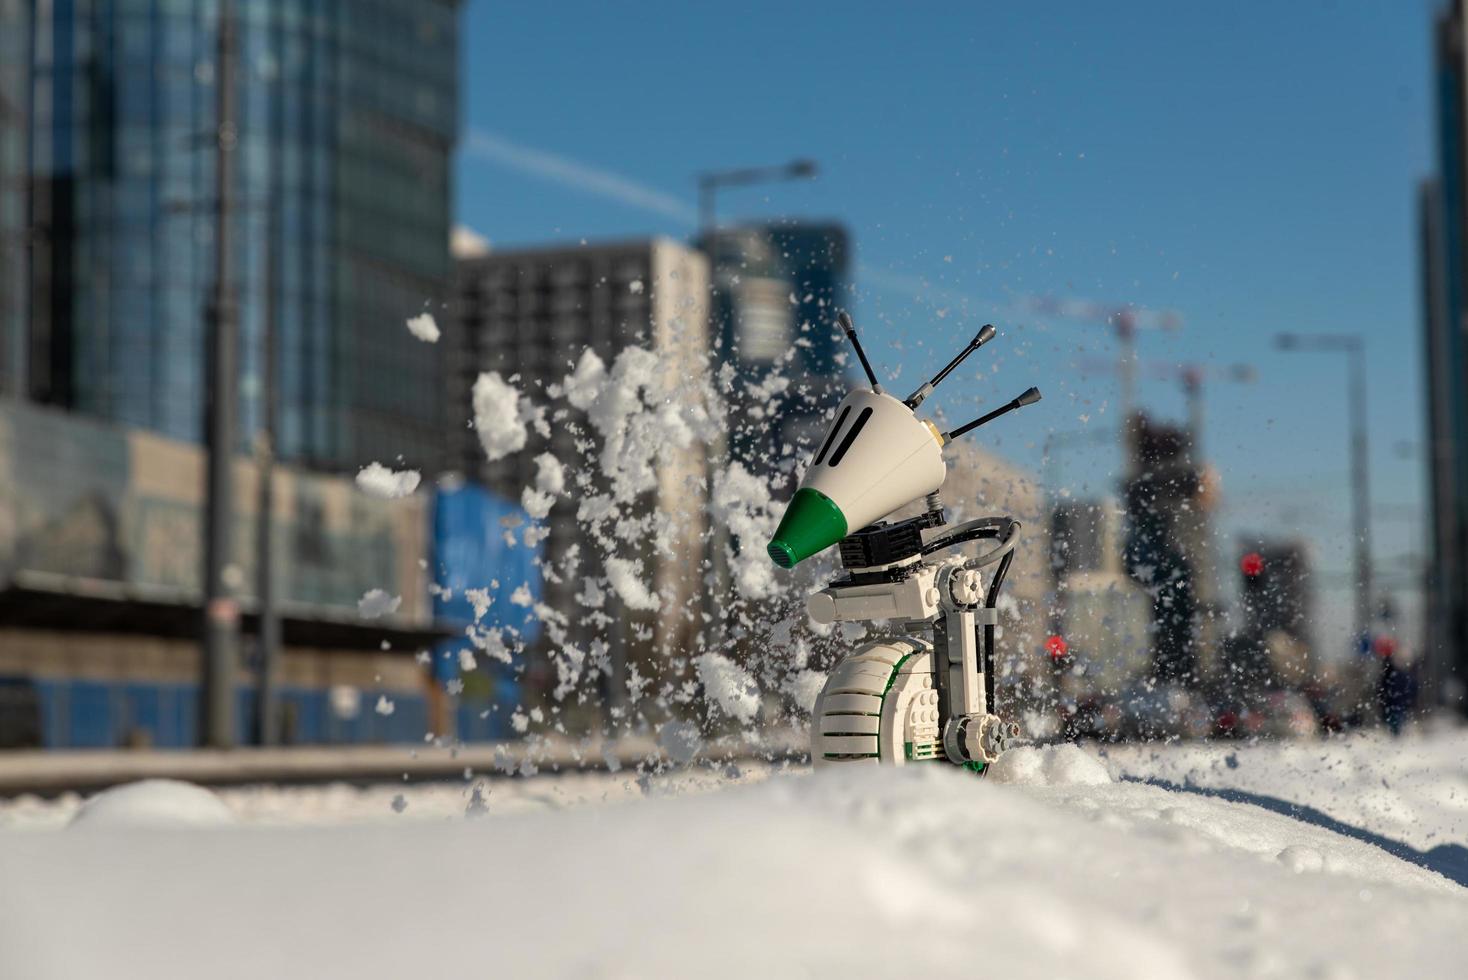 Warsaw, 2021 - Lego star wars droid DO on snow in the city photo